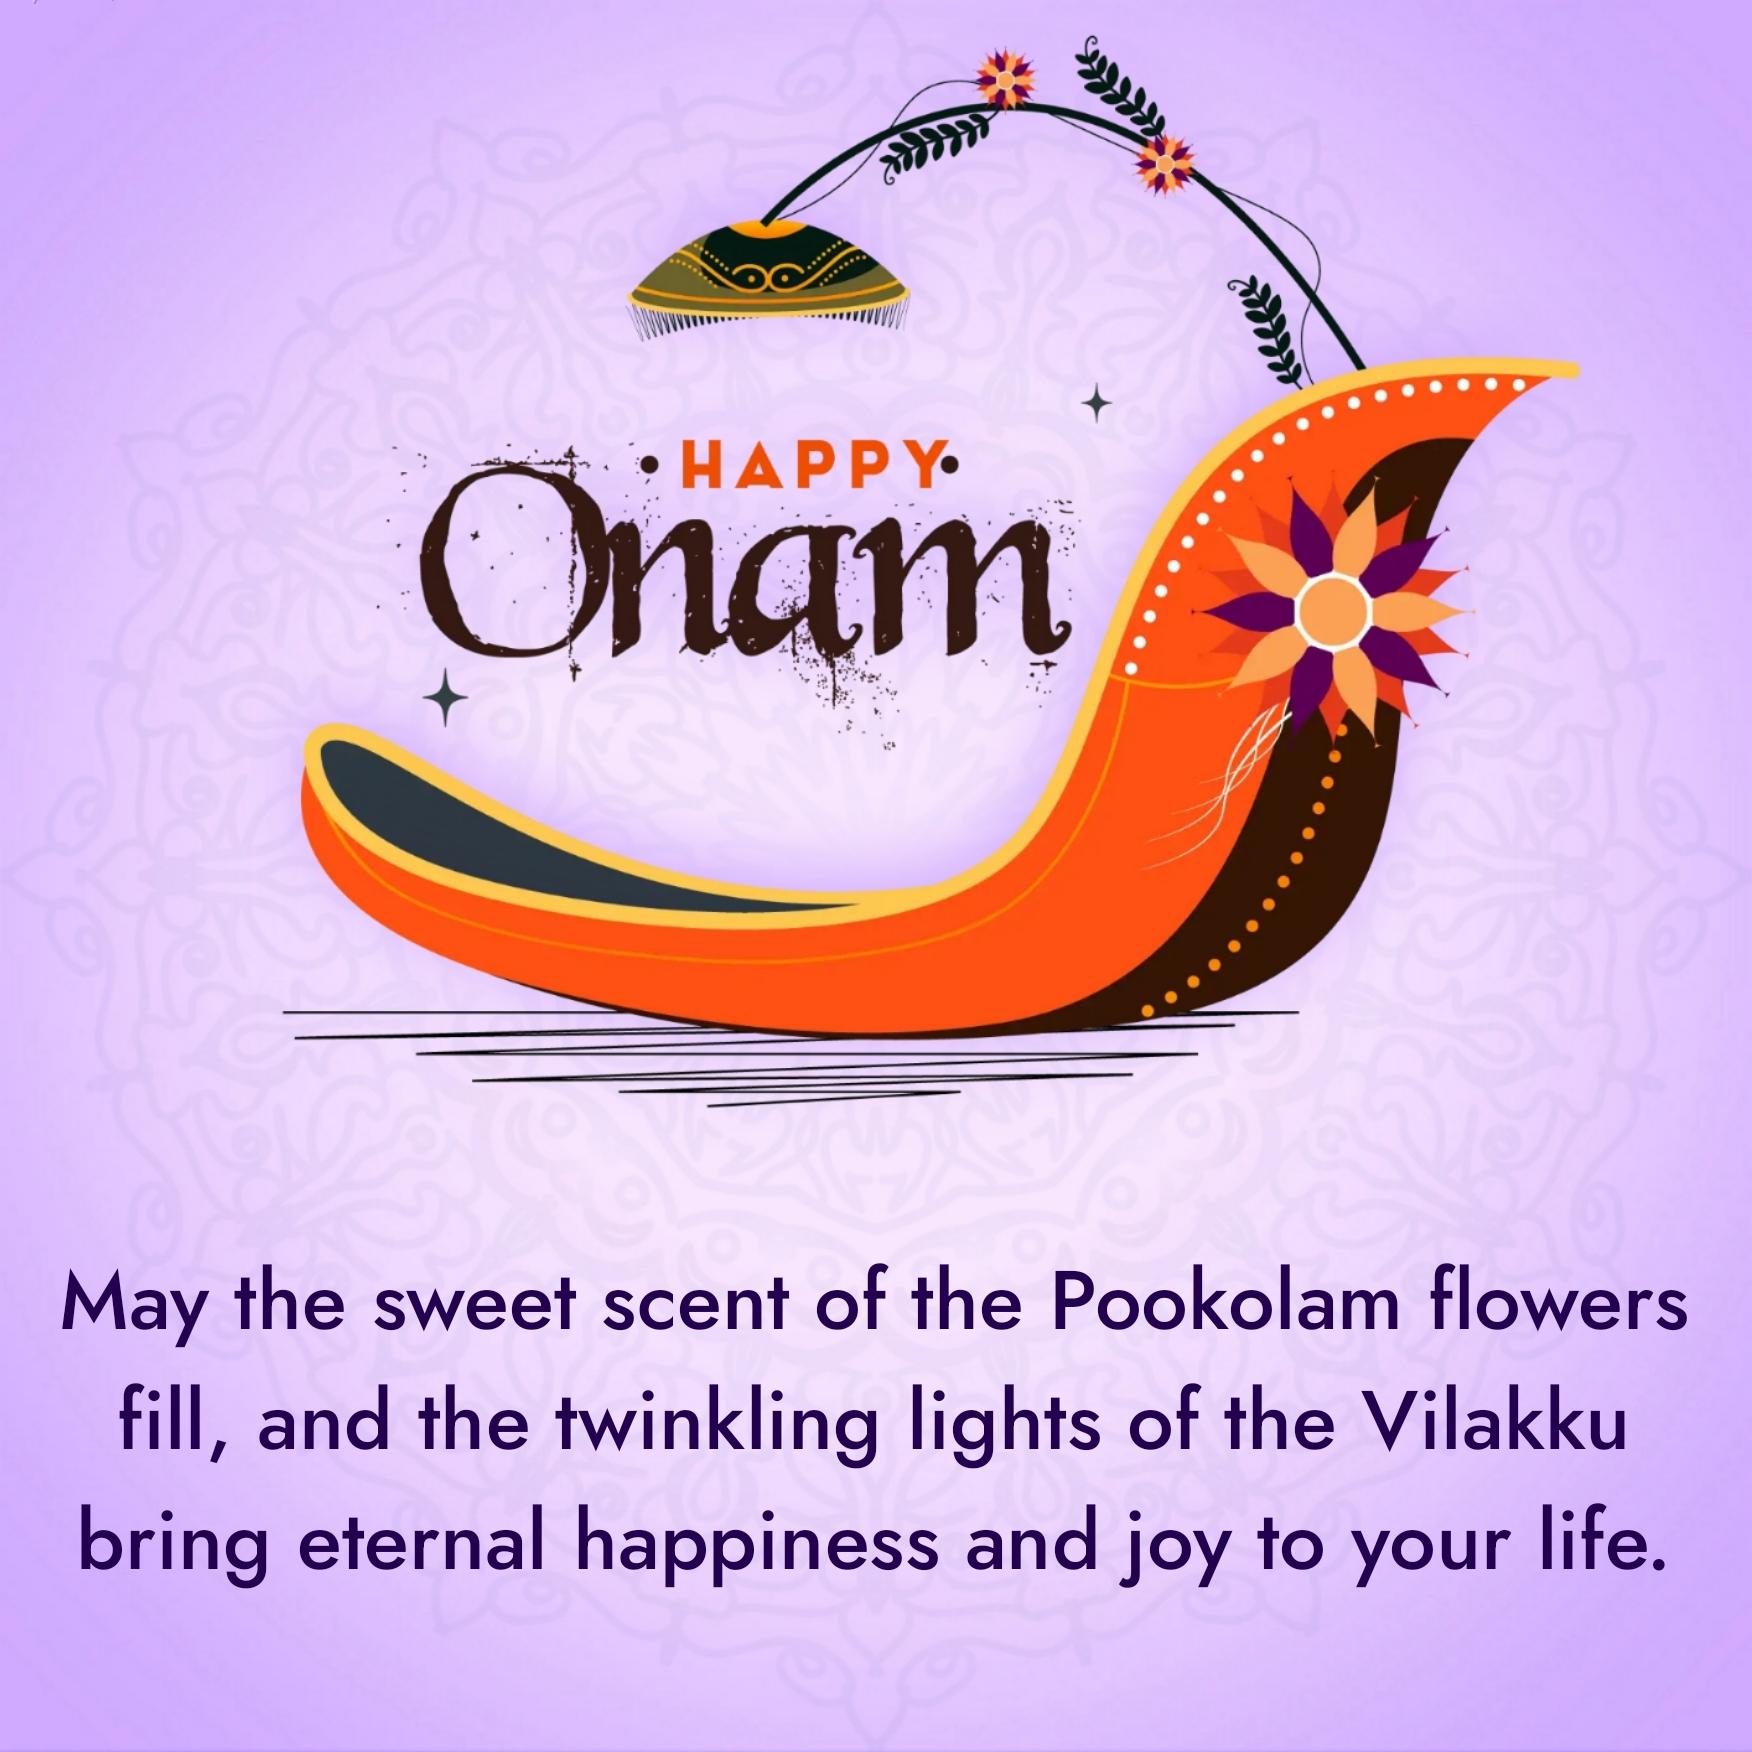 May the sweet scent of the Pookolam flowers fill